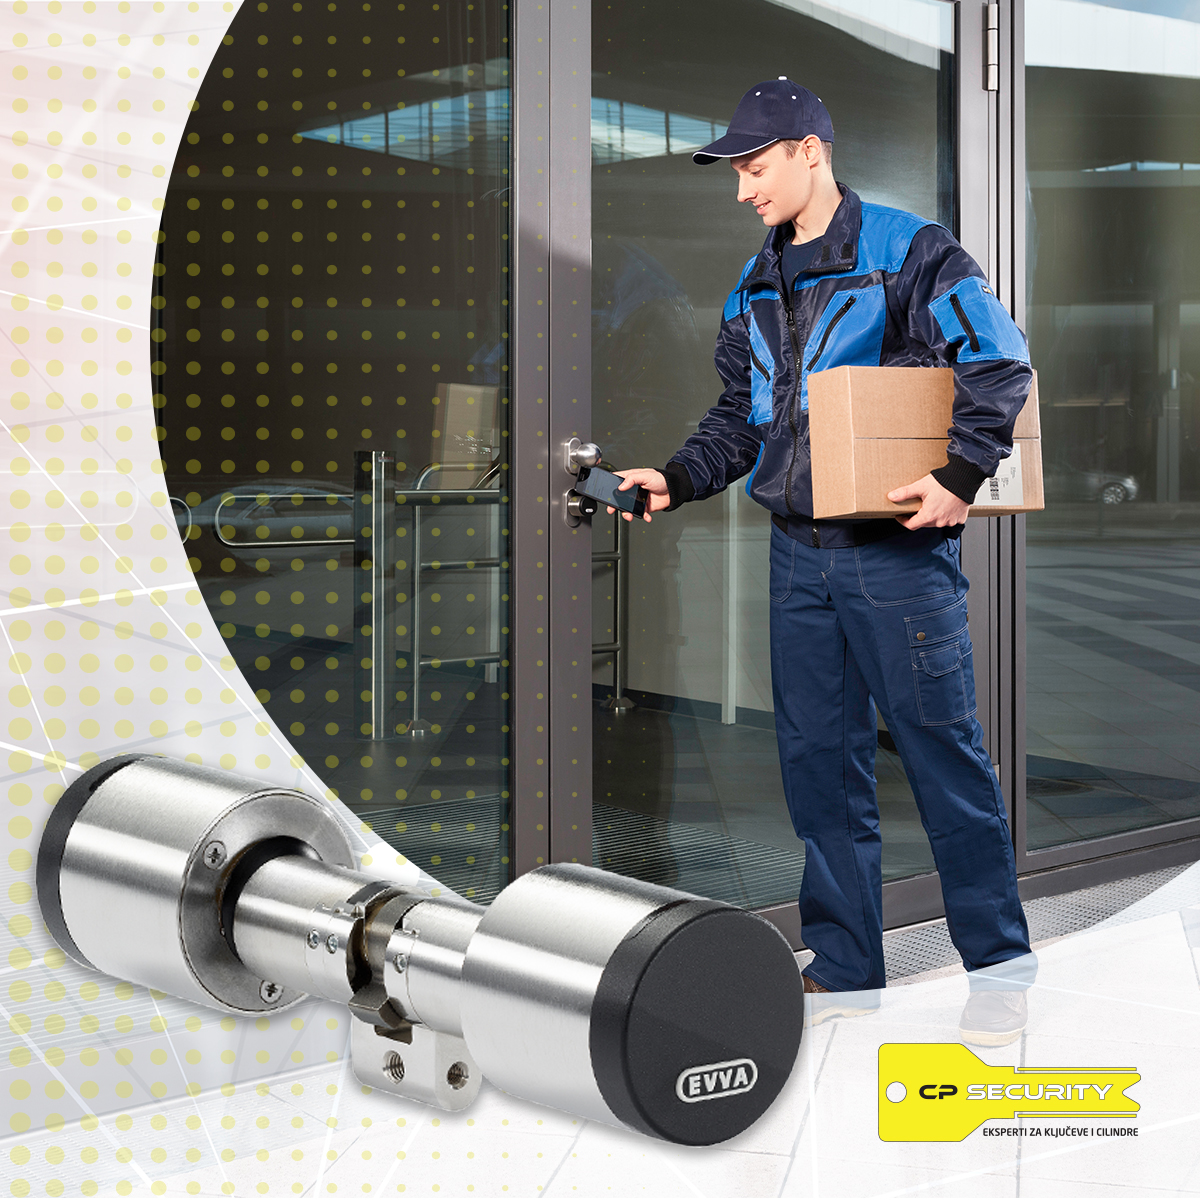 Electronic lock for access control opened with smart phone